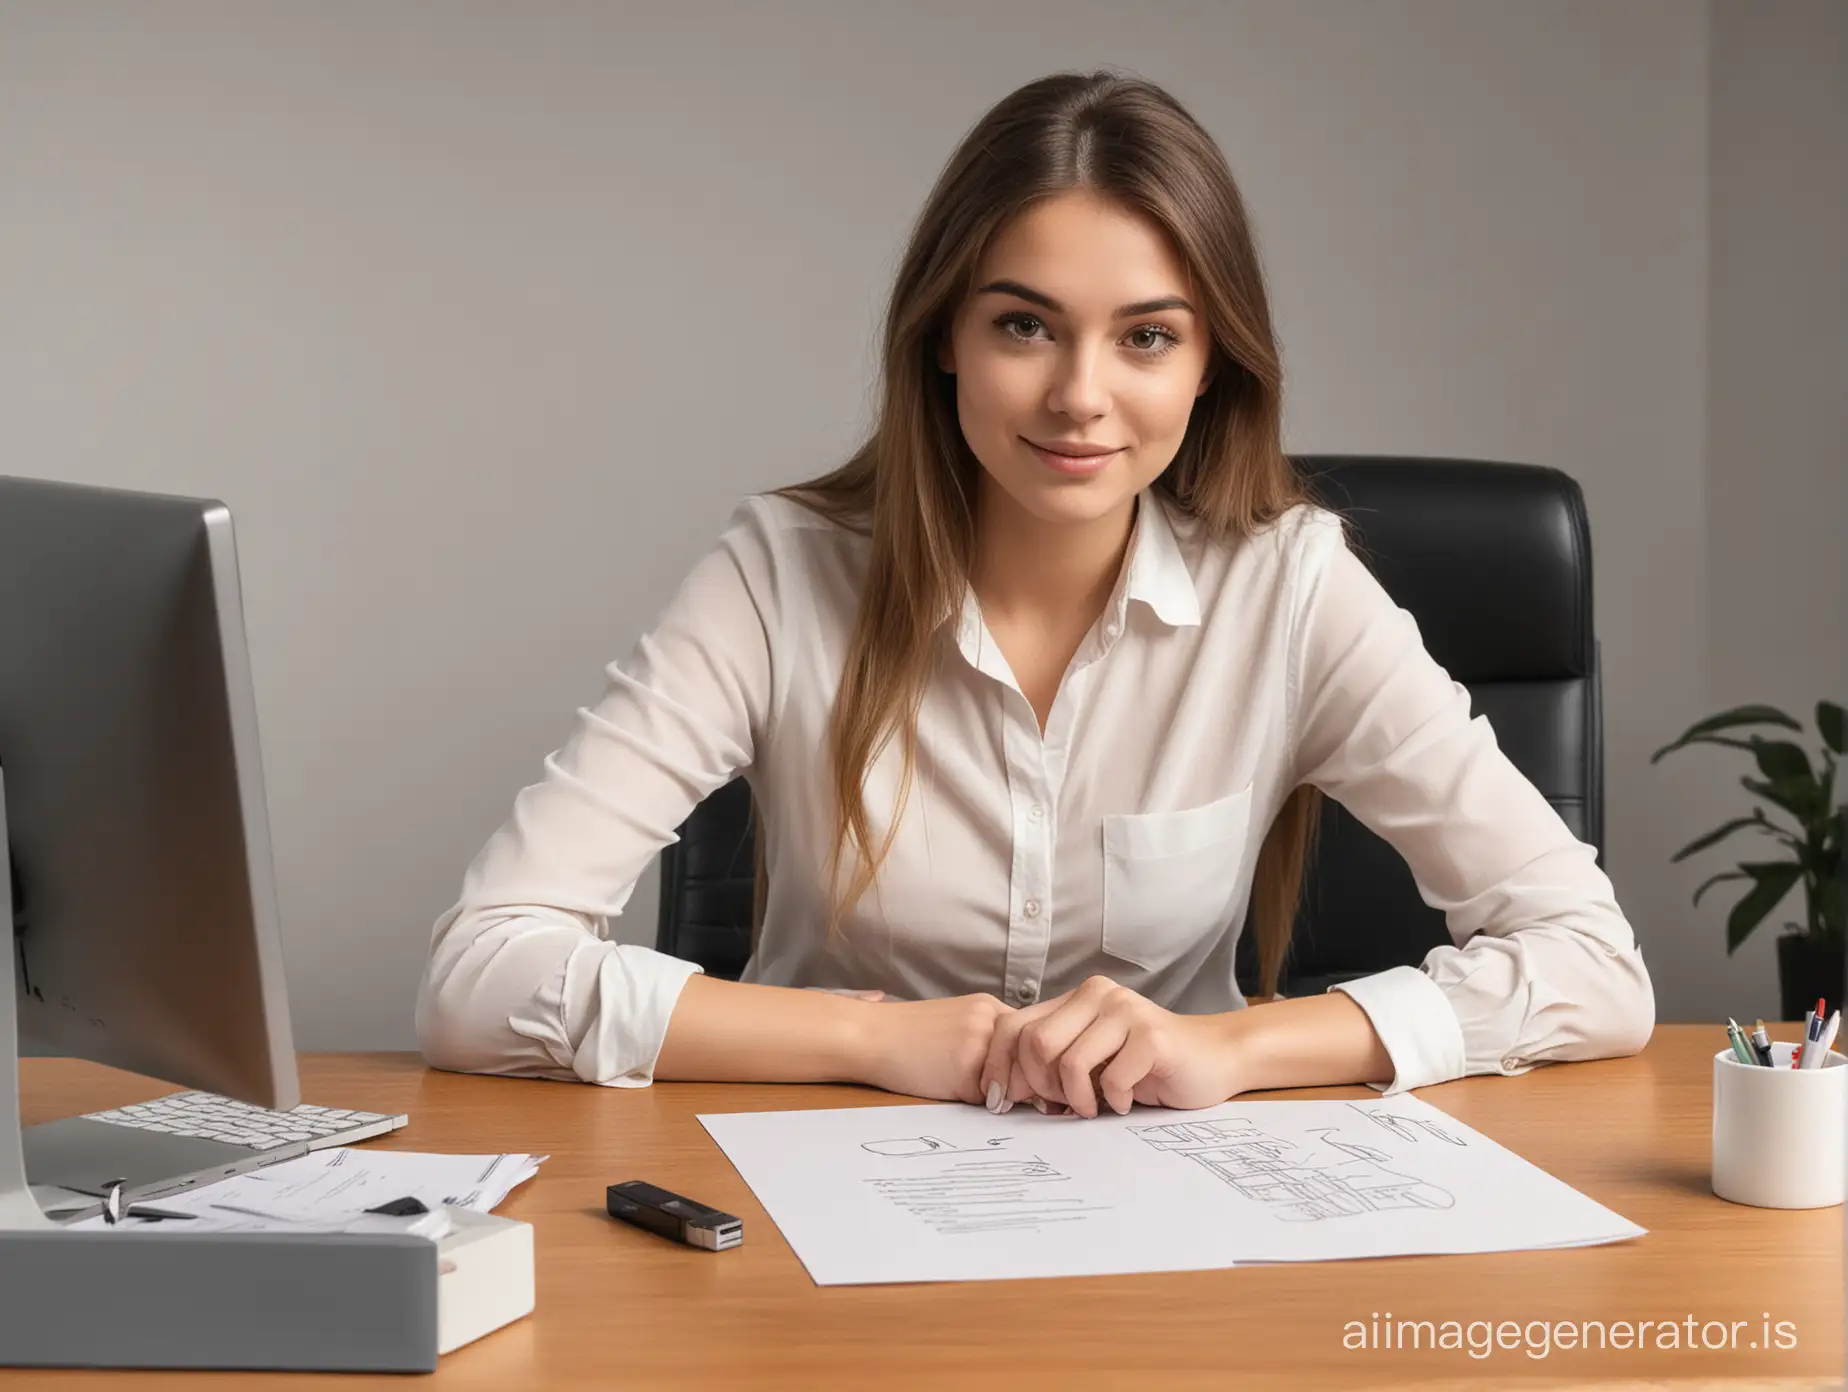 Draw a girl in a drawn style sitting at an office desk holding a flash drive with an electronic signature.